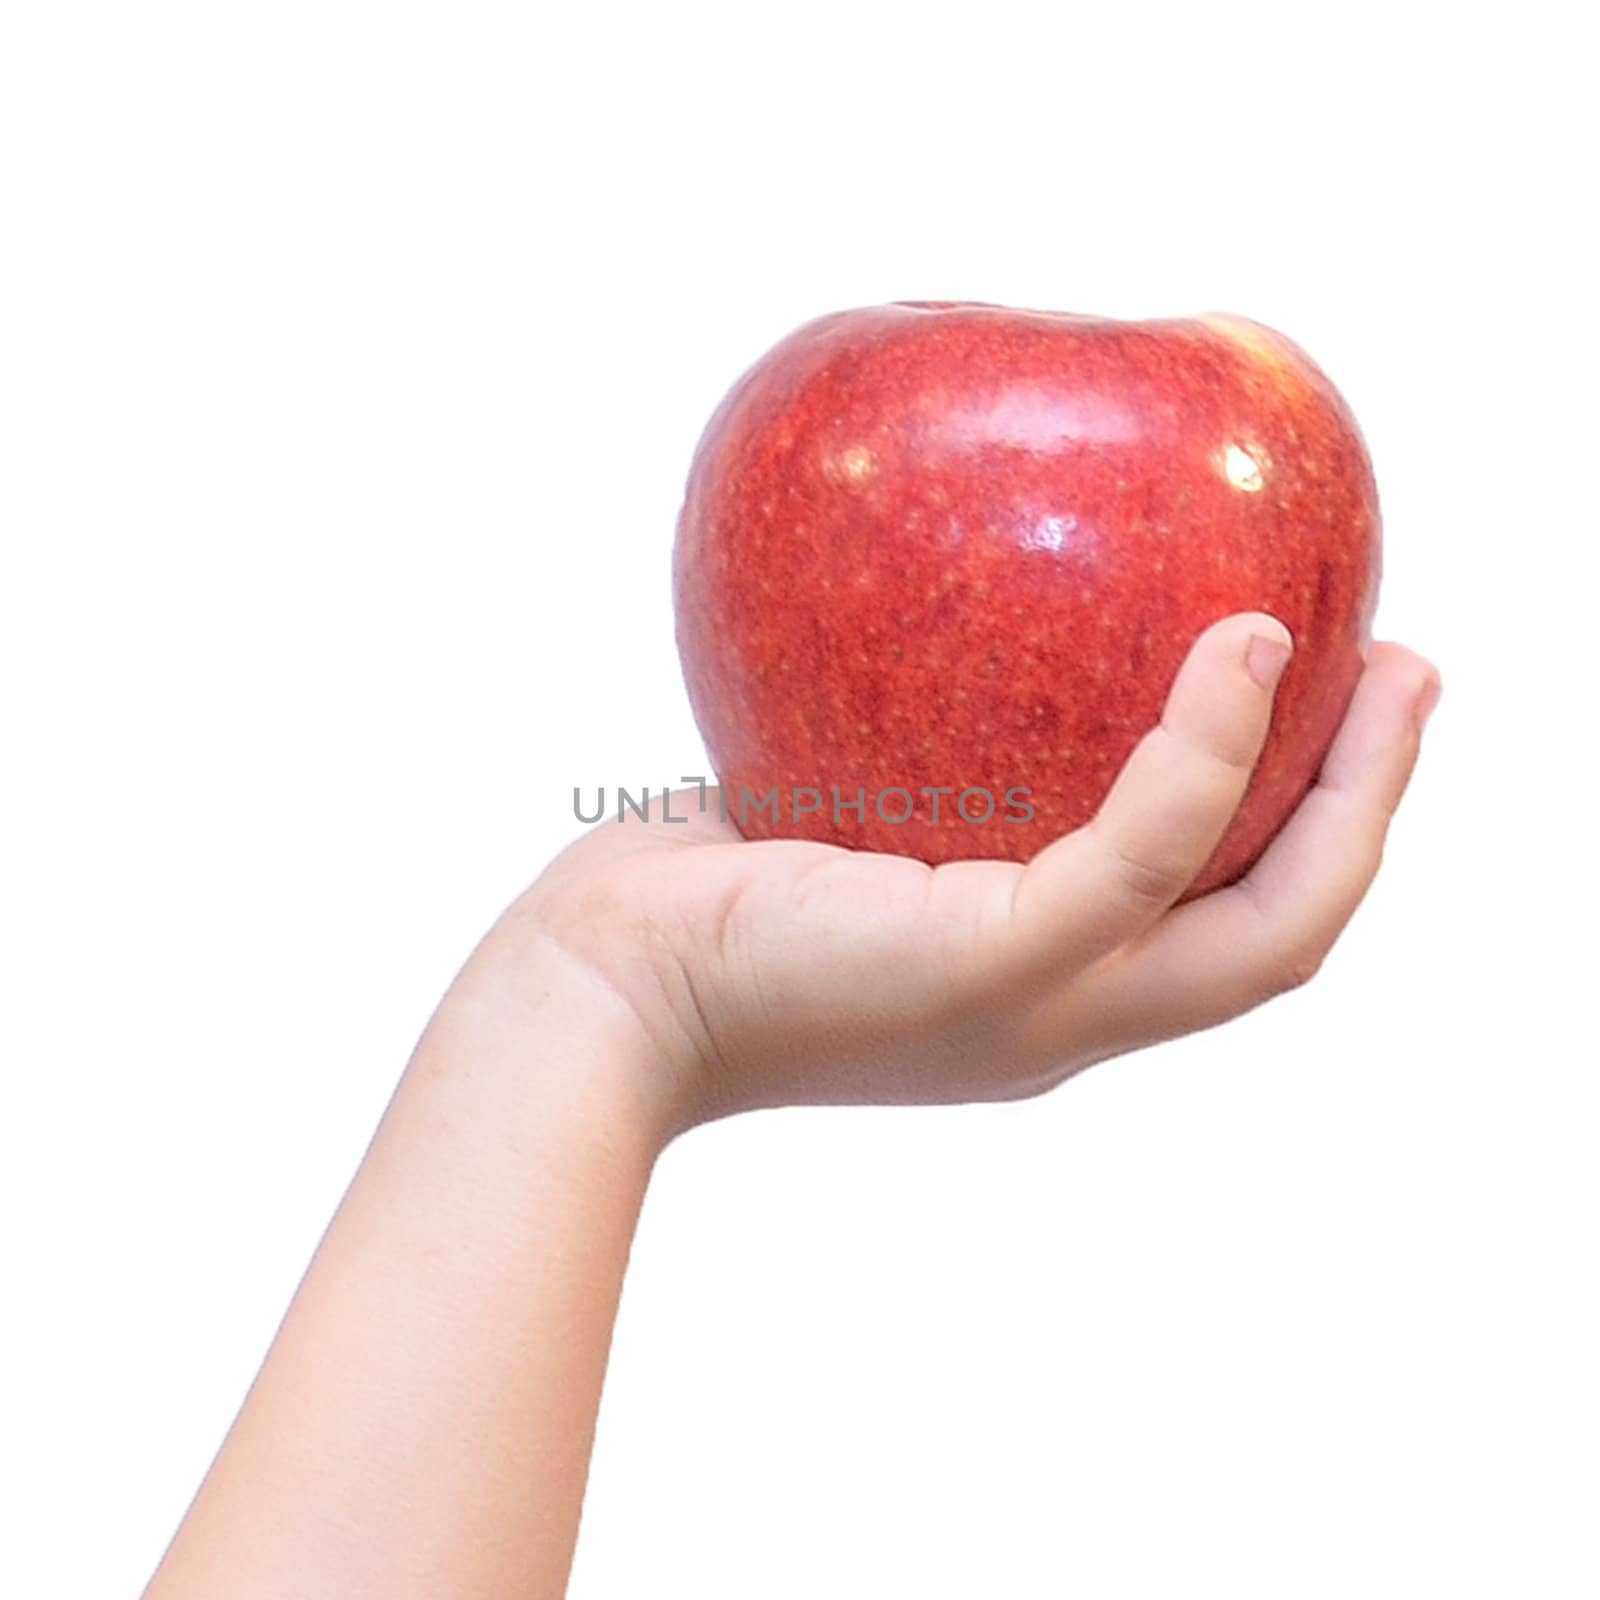 The Hand and apple on white background.